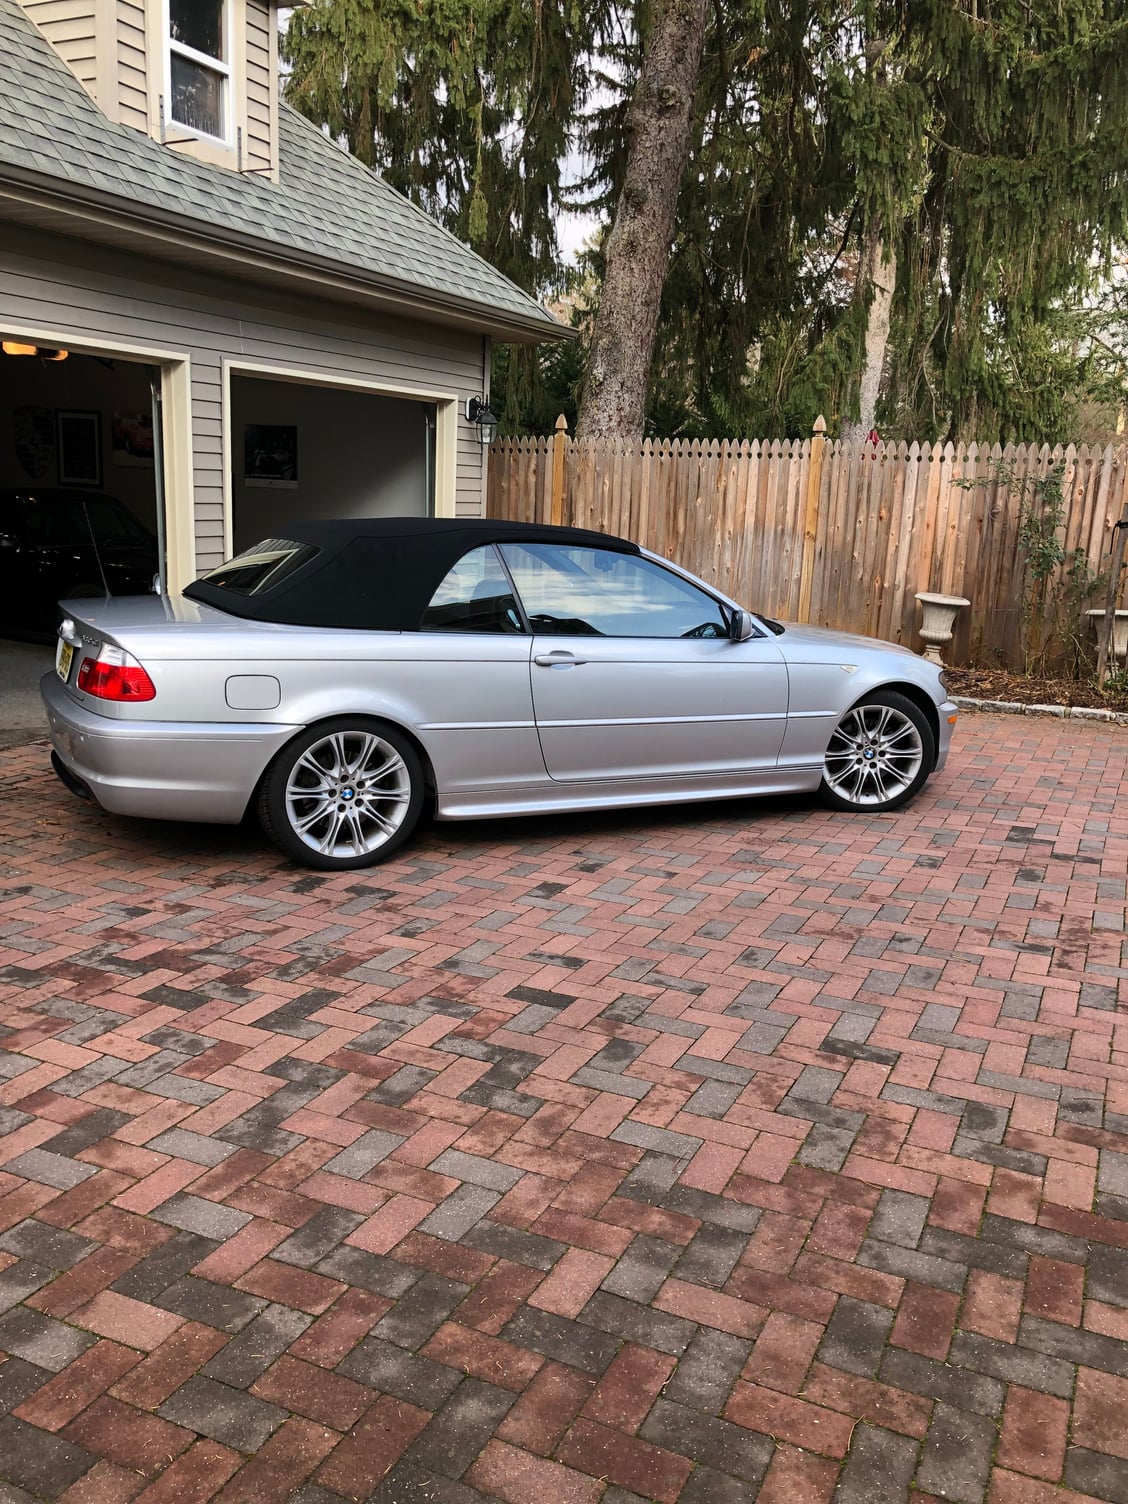 2006 BMW 330Ci - 2006 BMW 330 ZHP convertible - Used - VIN WBABW53436PZ31250 - 87,450 Miles - 6 cyl - 2WD - Automatic - Convertible - Silver - Moorestown, NJ 08057, United States